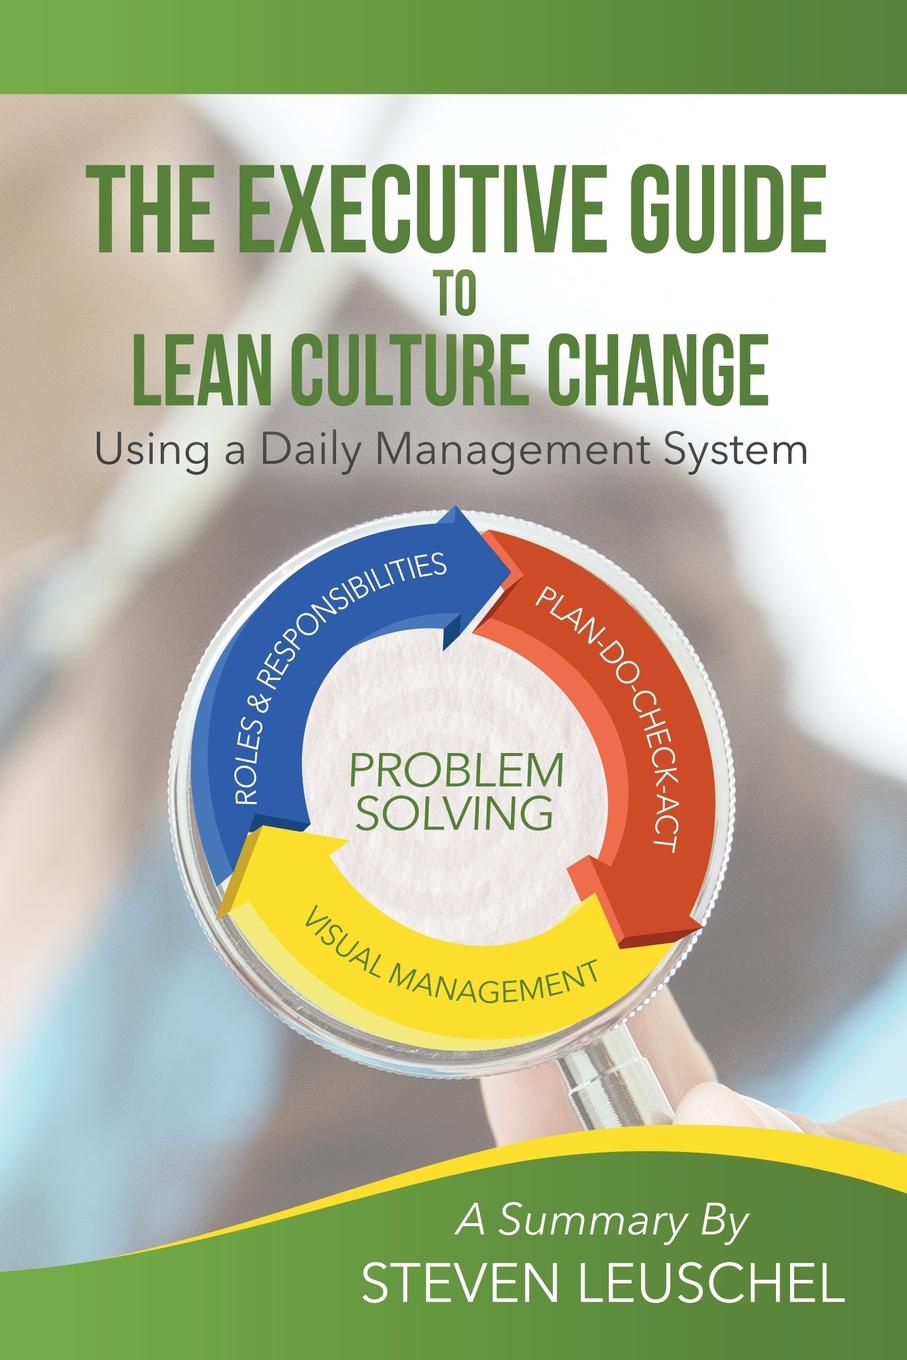 The Executive Guide to Lean Culture Change. Using a Daily Management System